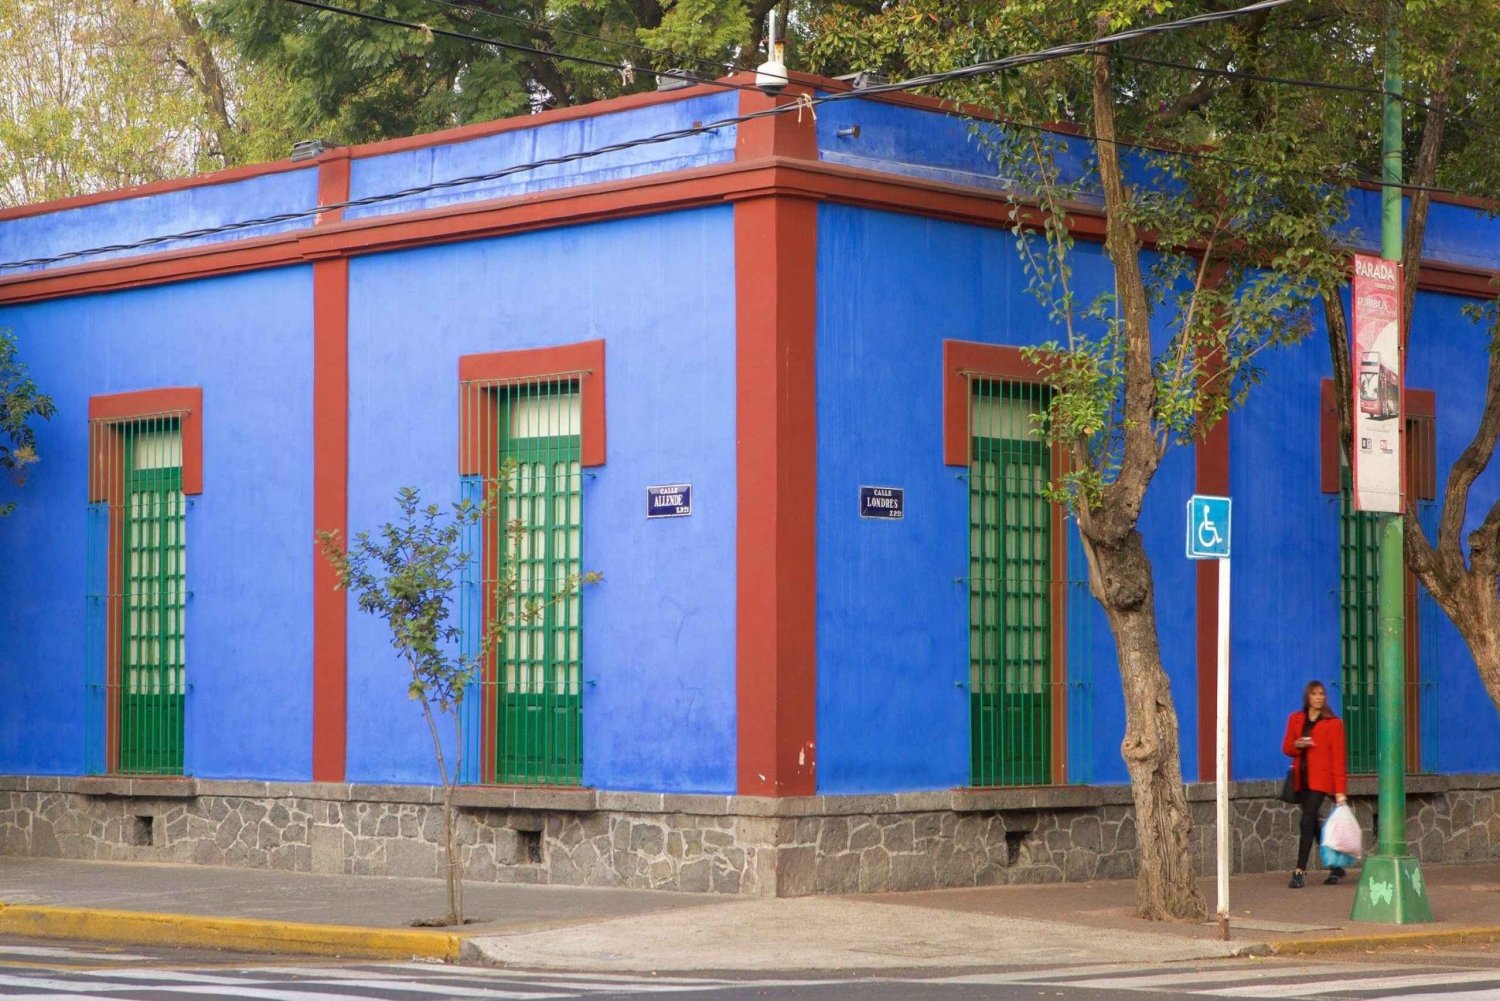 Tickets to The Frida Kahlo Museum & Diego Rivera Museum